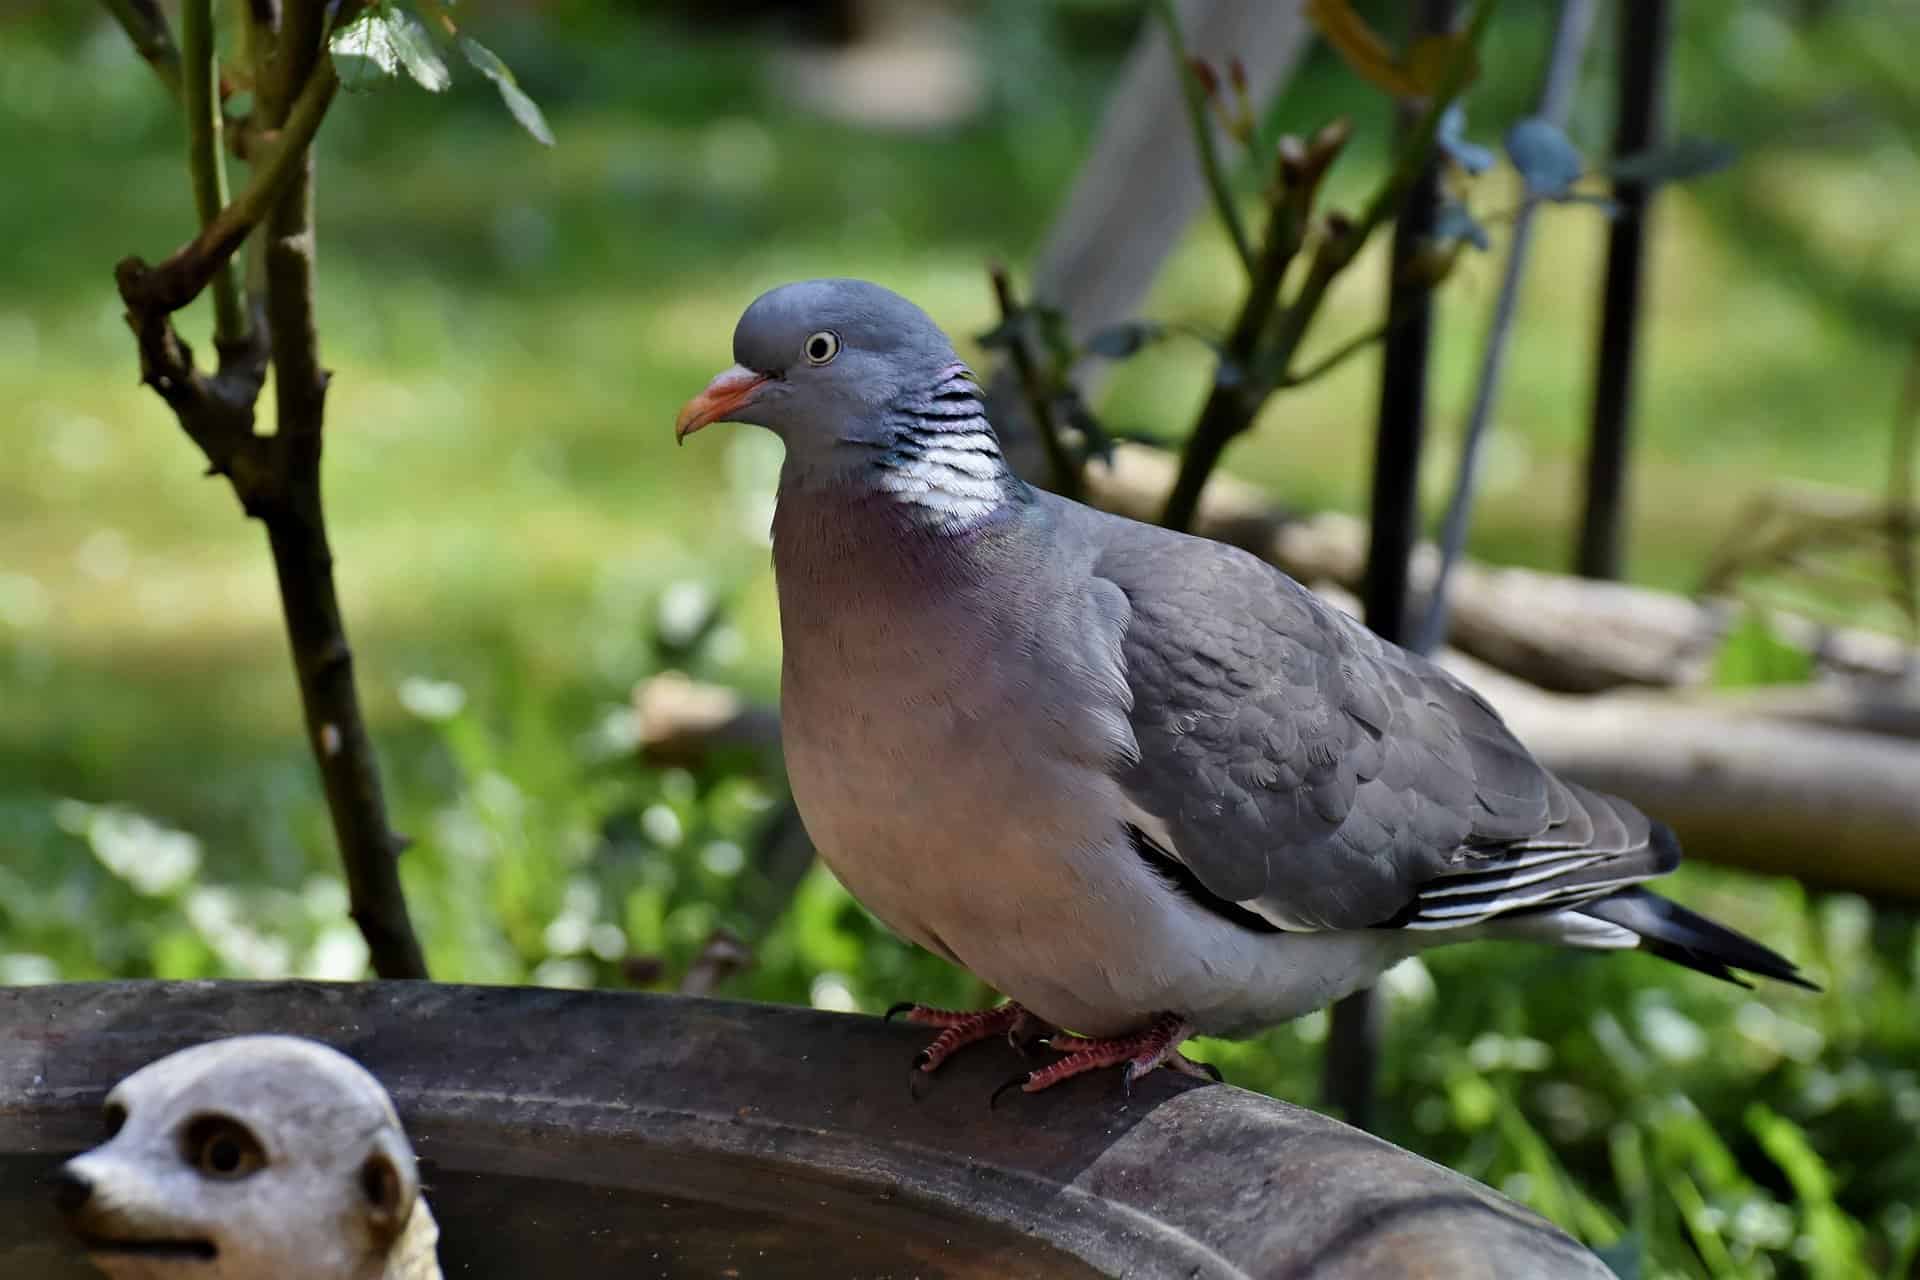 Band tailed pigeon